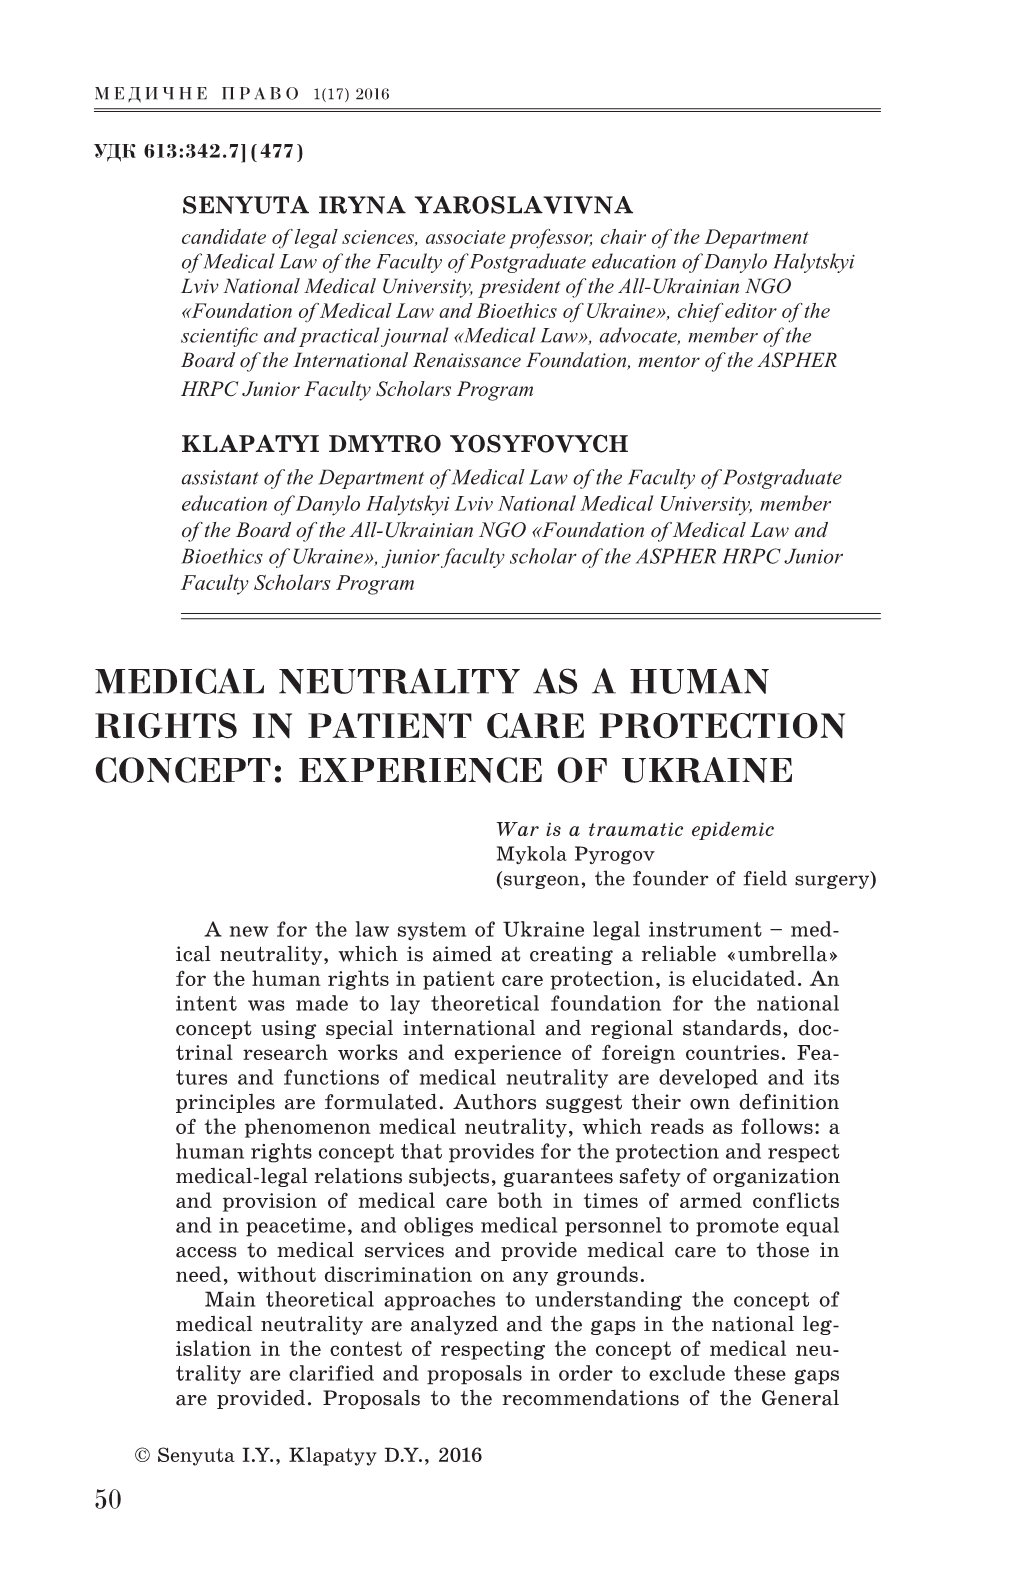 Medical Neutrality As a Human Rights in Patient Care Protection Concept: Experience of Ukraine